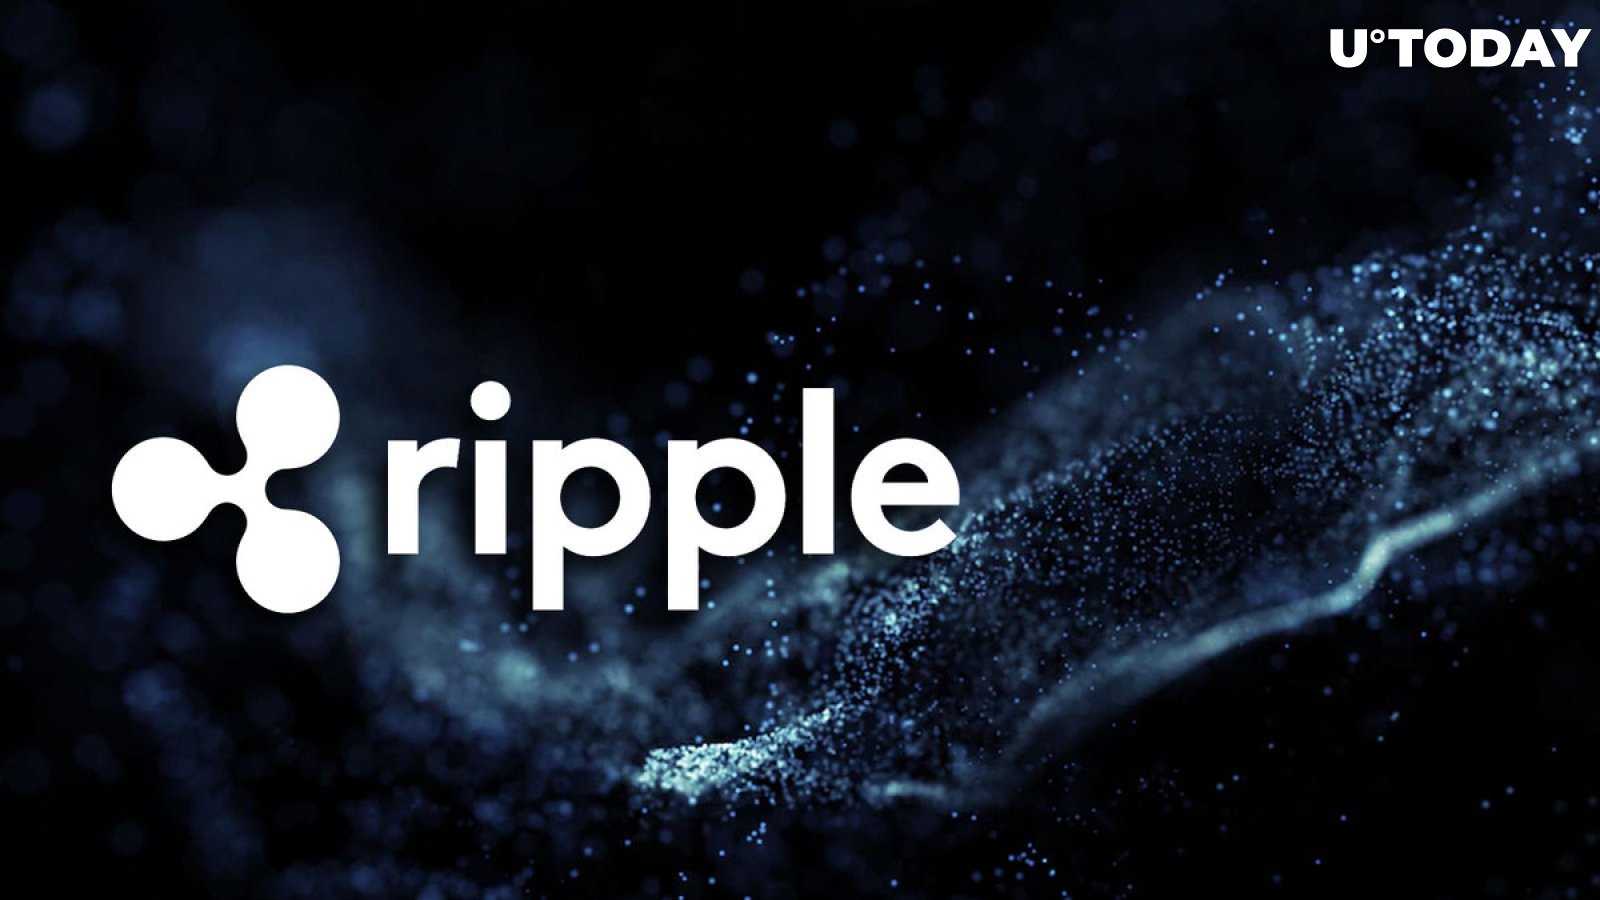 Ripple’s IPO could come within 12 months, suggests CEO